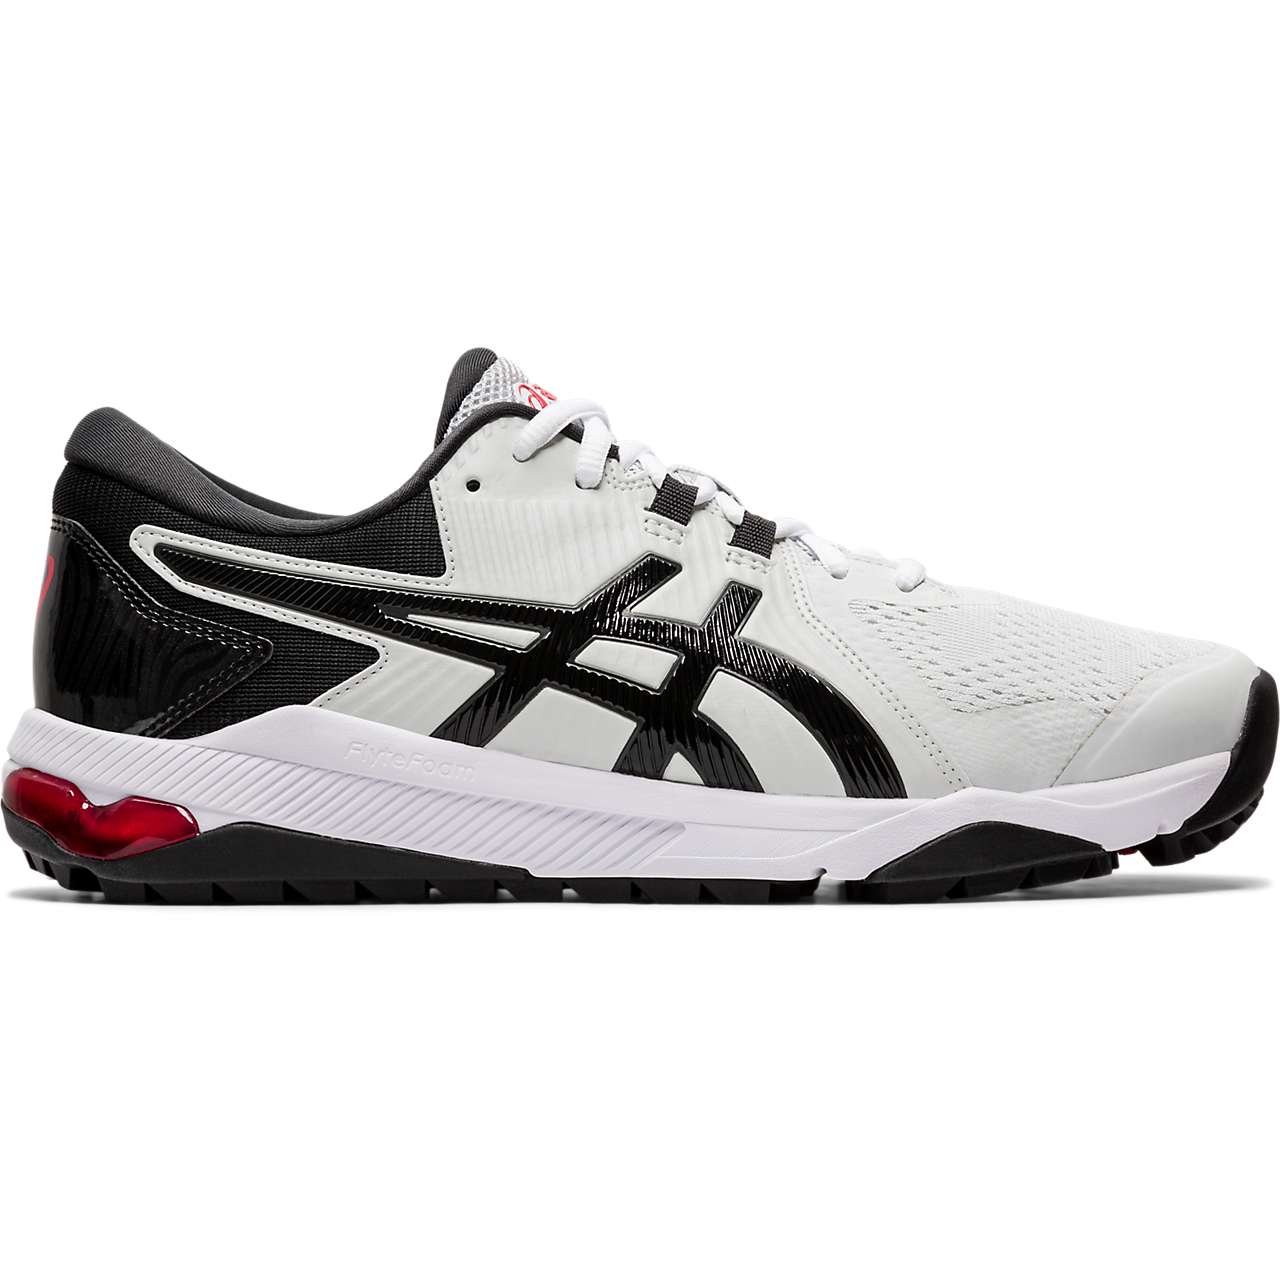 asic golf shoes for sale